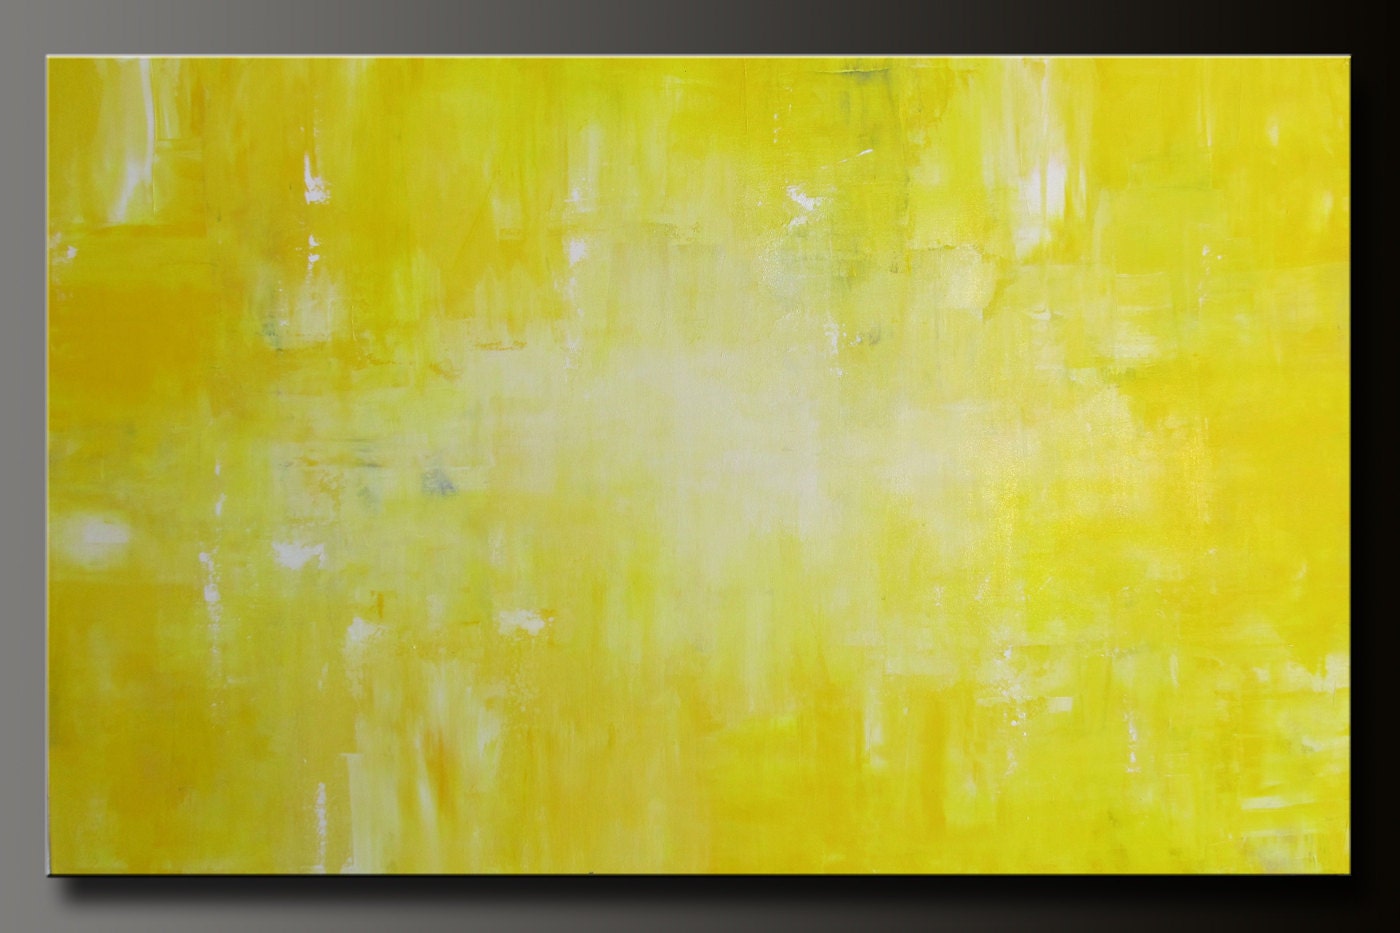 Abstract in Yellow 10 - 48x30 - Abstract Acrylic Painting - Huge - Highly Textured Contemporary Original Wall Art